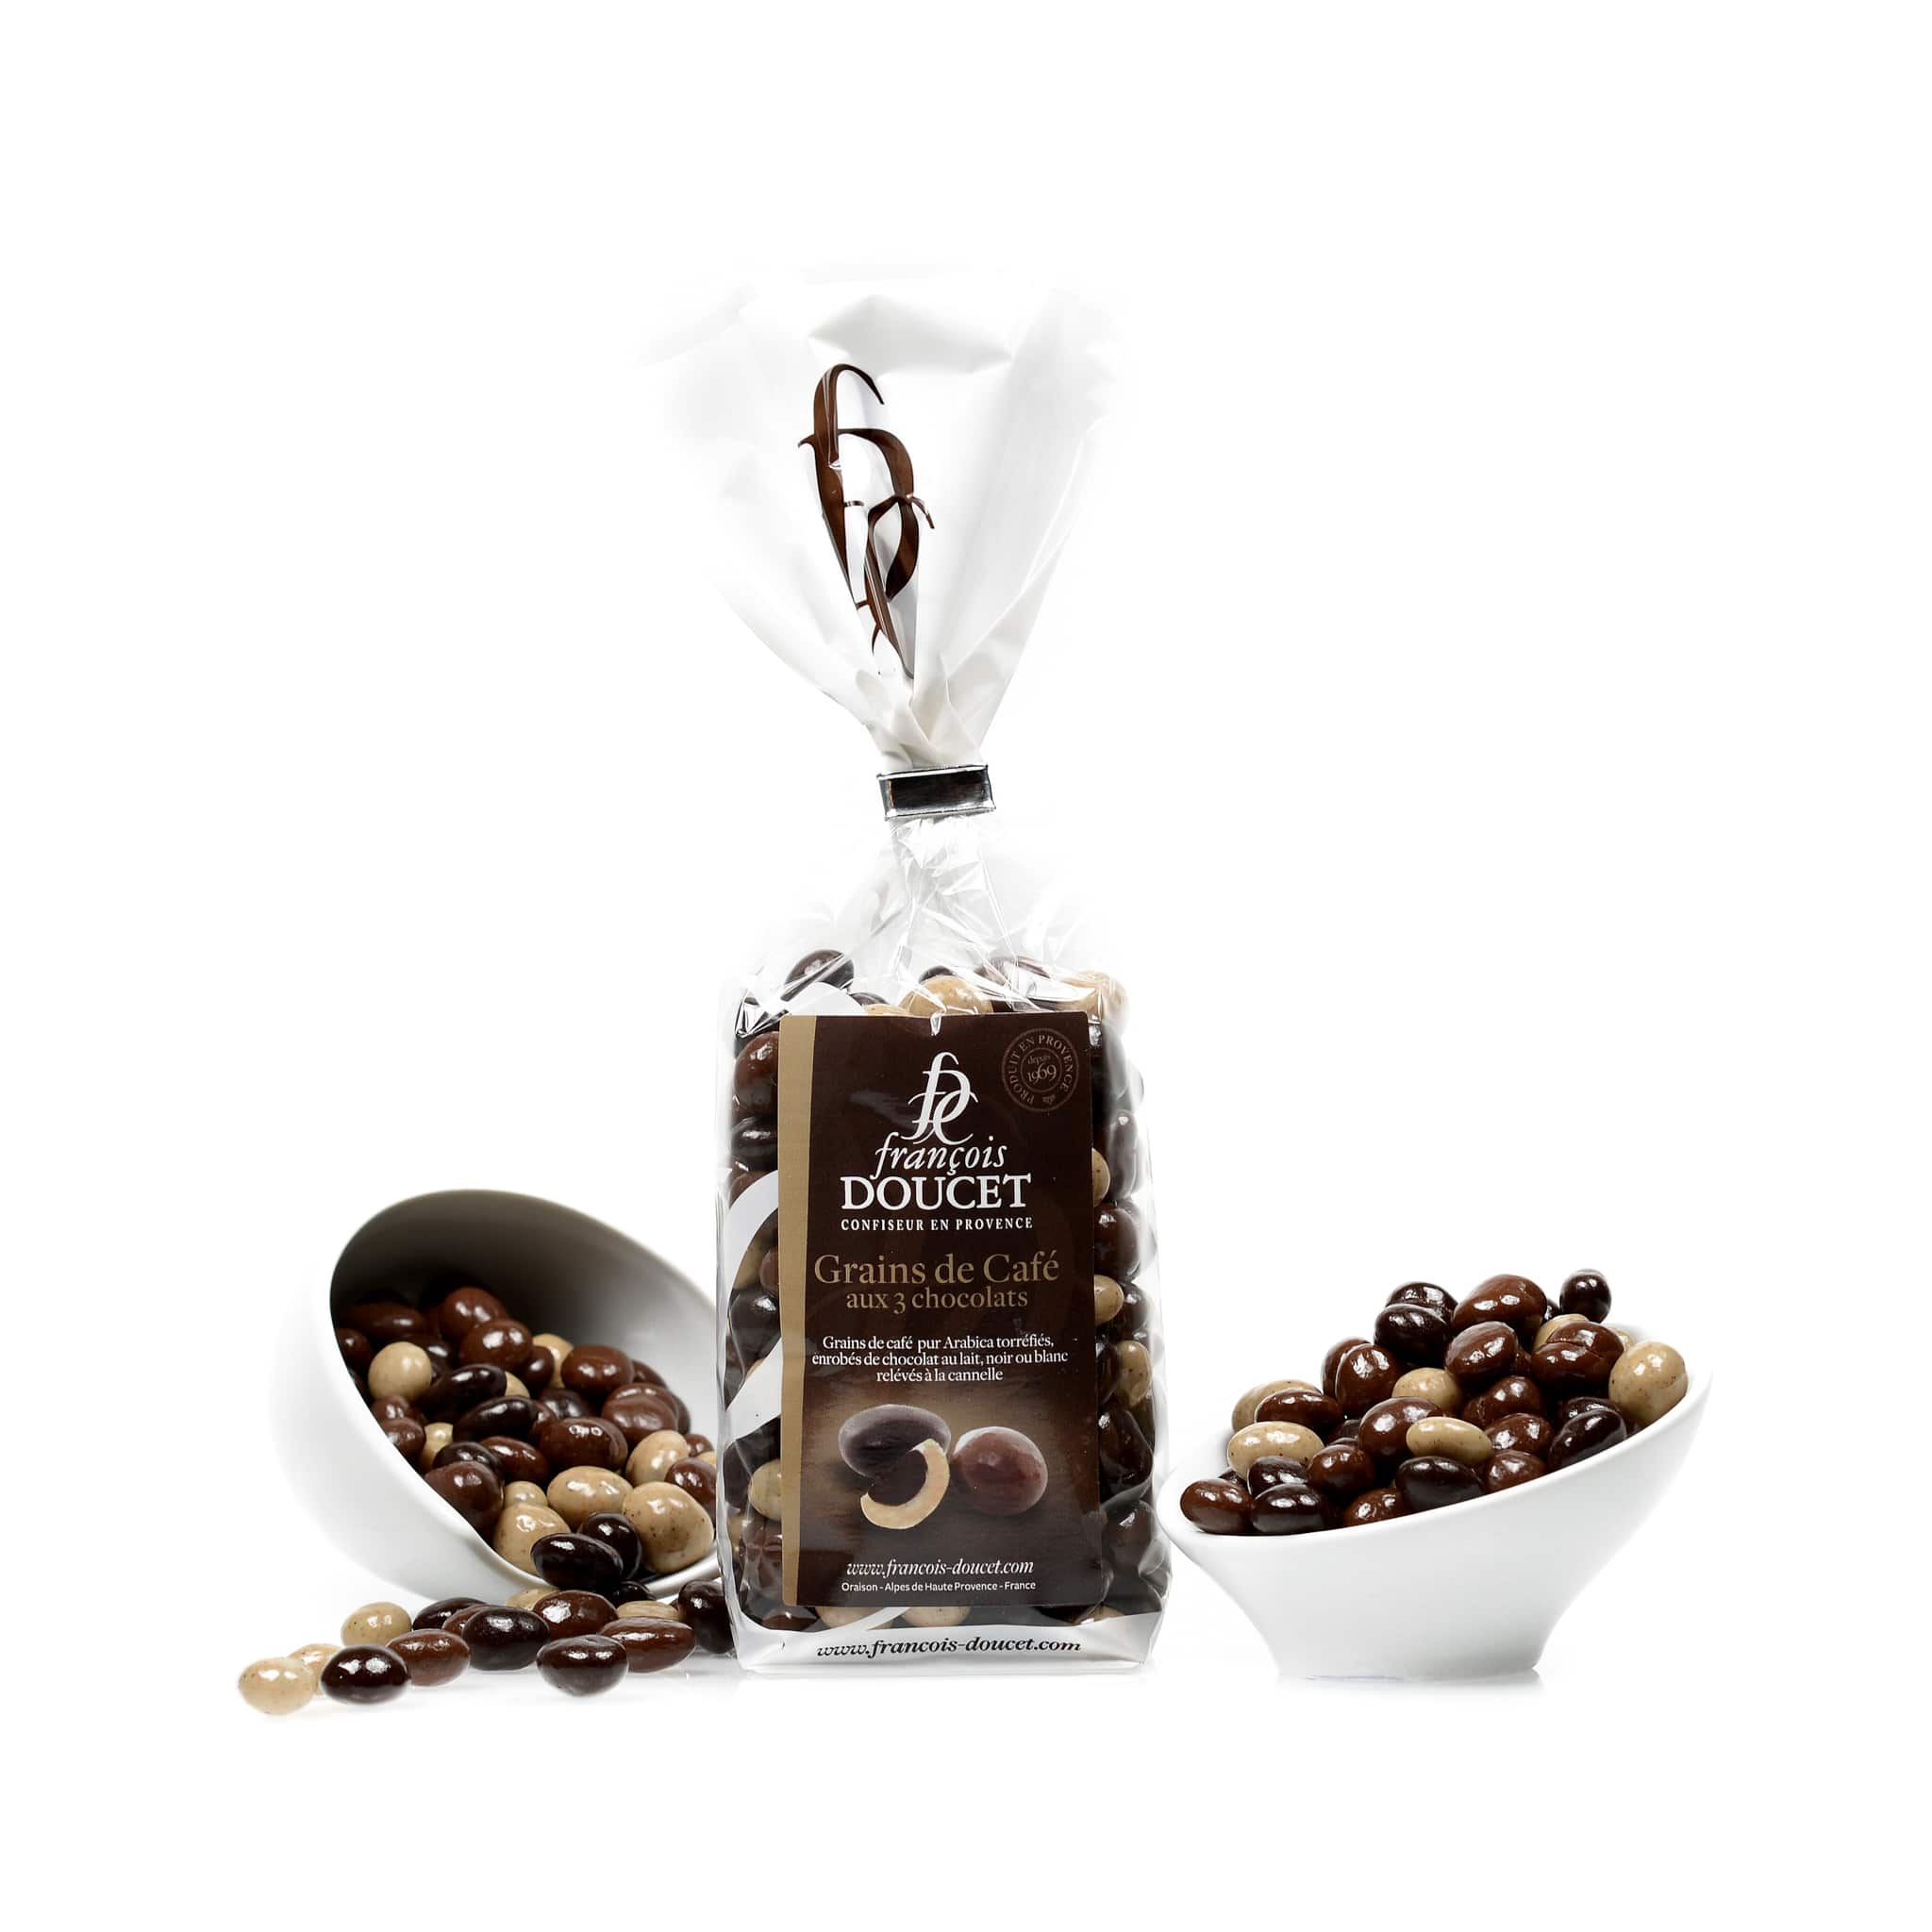 Francois Doucet Assorted Chocolate Coffee Beans 200g